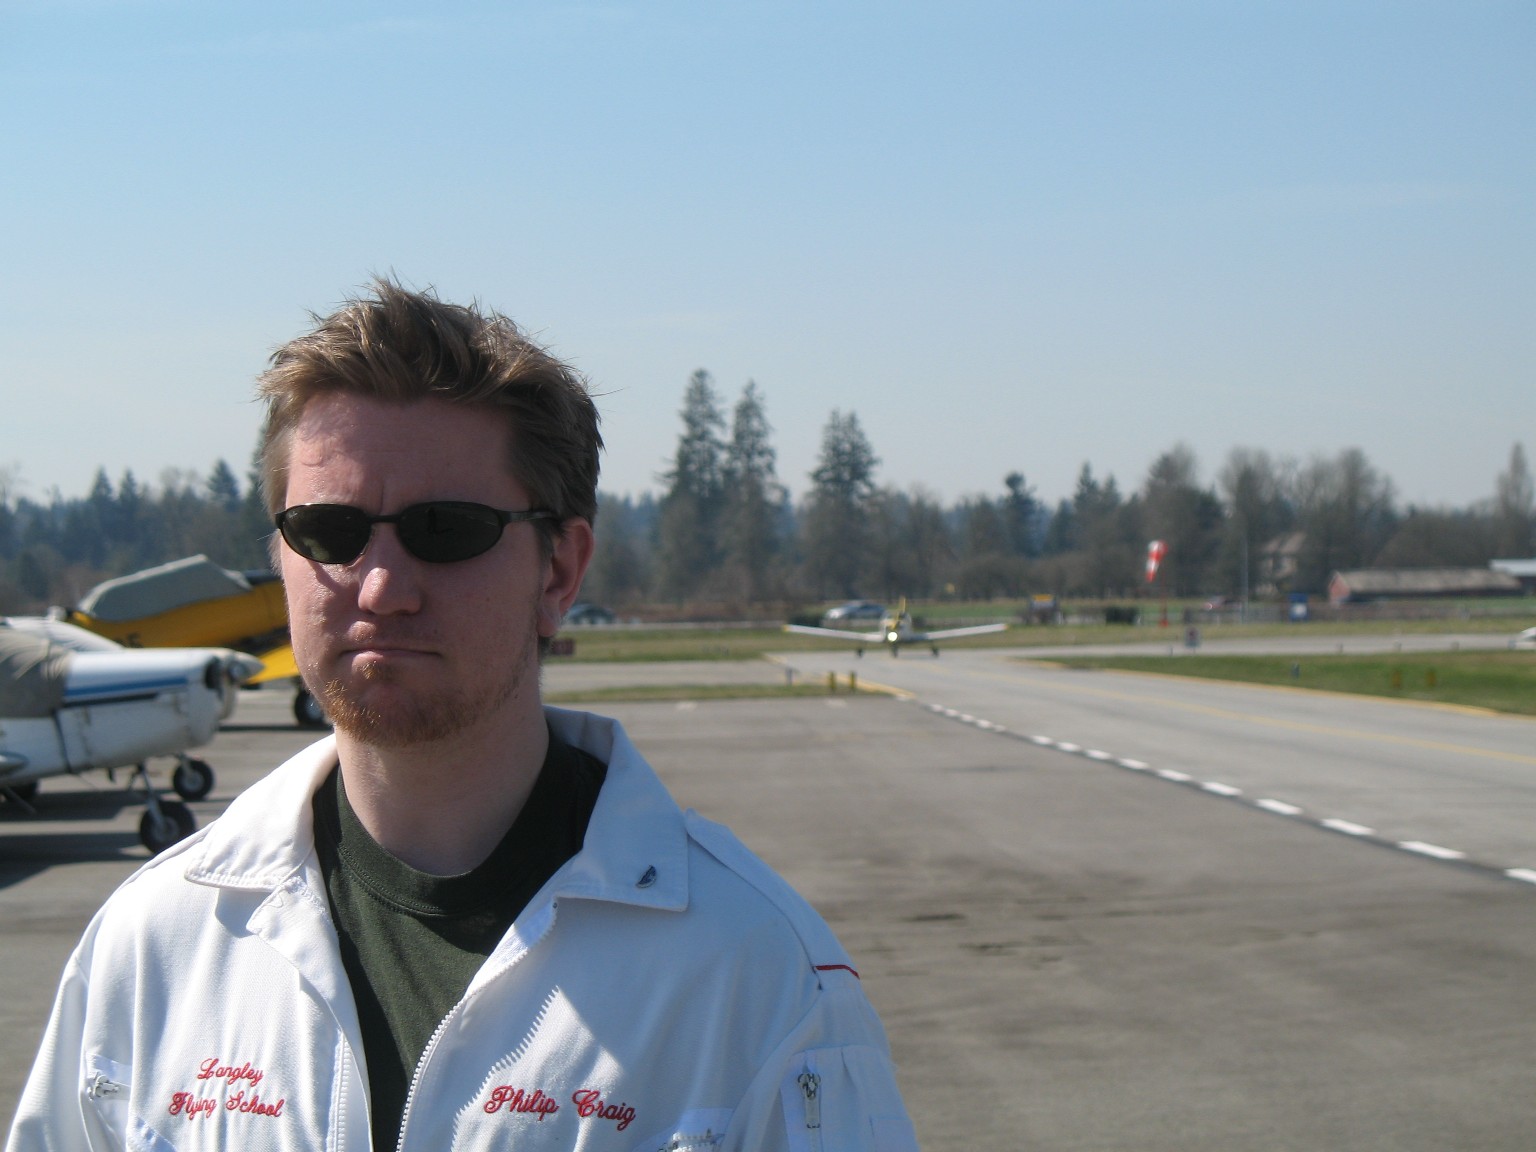 Flight Instructor Philip Craig with his student, David Marshall, taxiing in after his First Solo landing (background).  Langley Flying School.